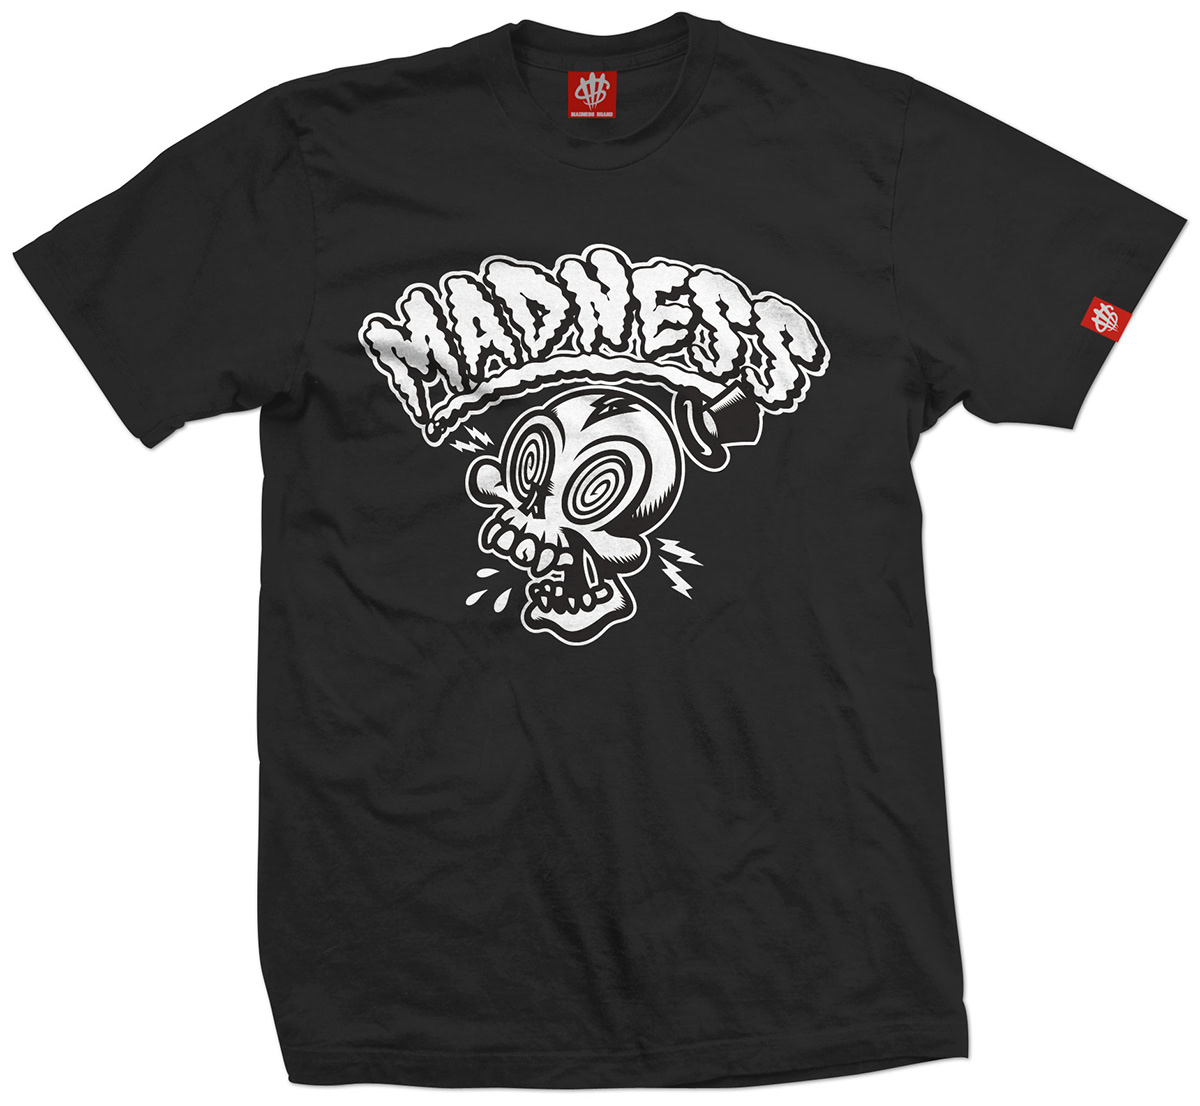 MAD Toy Design sike style t-shirts snake money streetwear